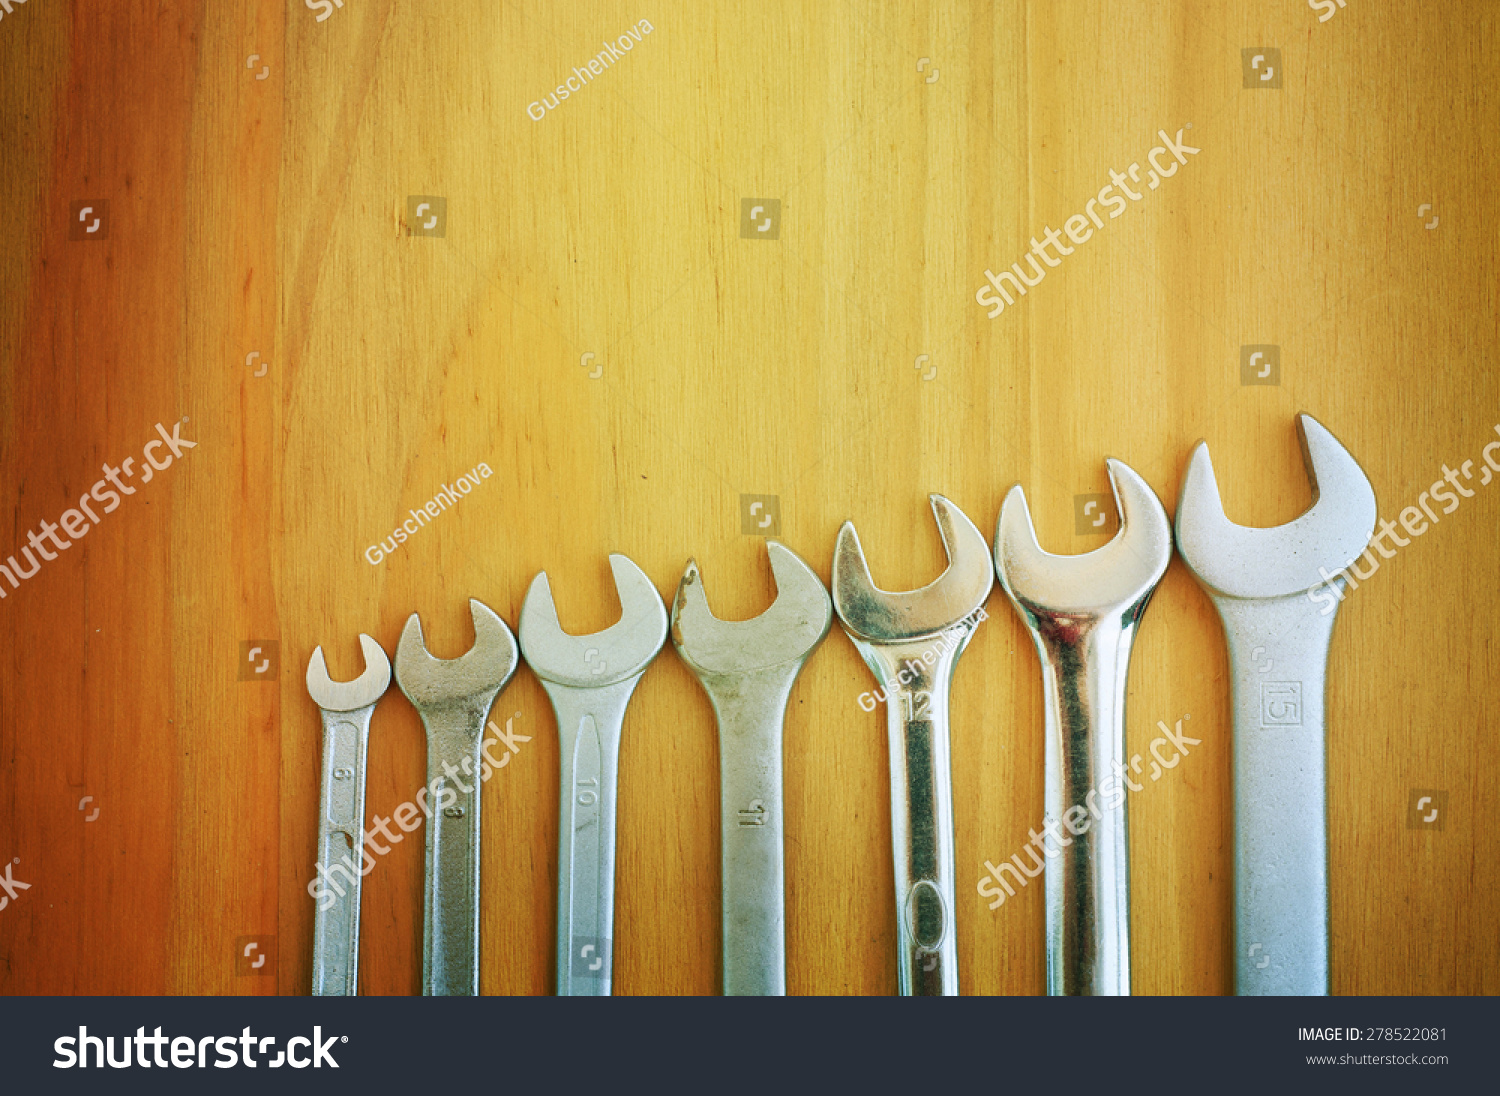 Set of tools over a wood panel with space for text #278522081